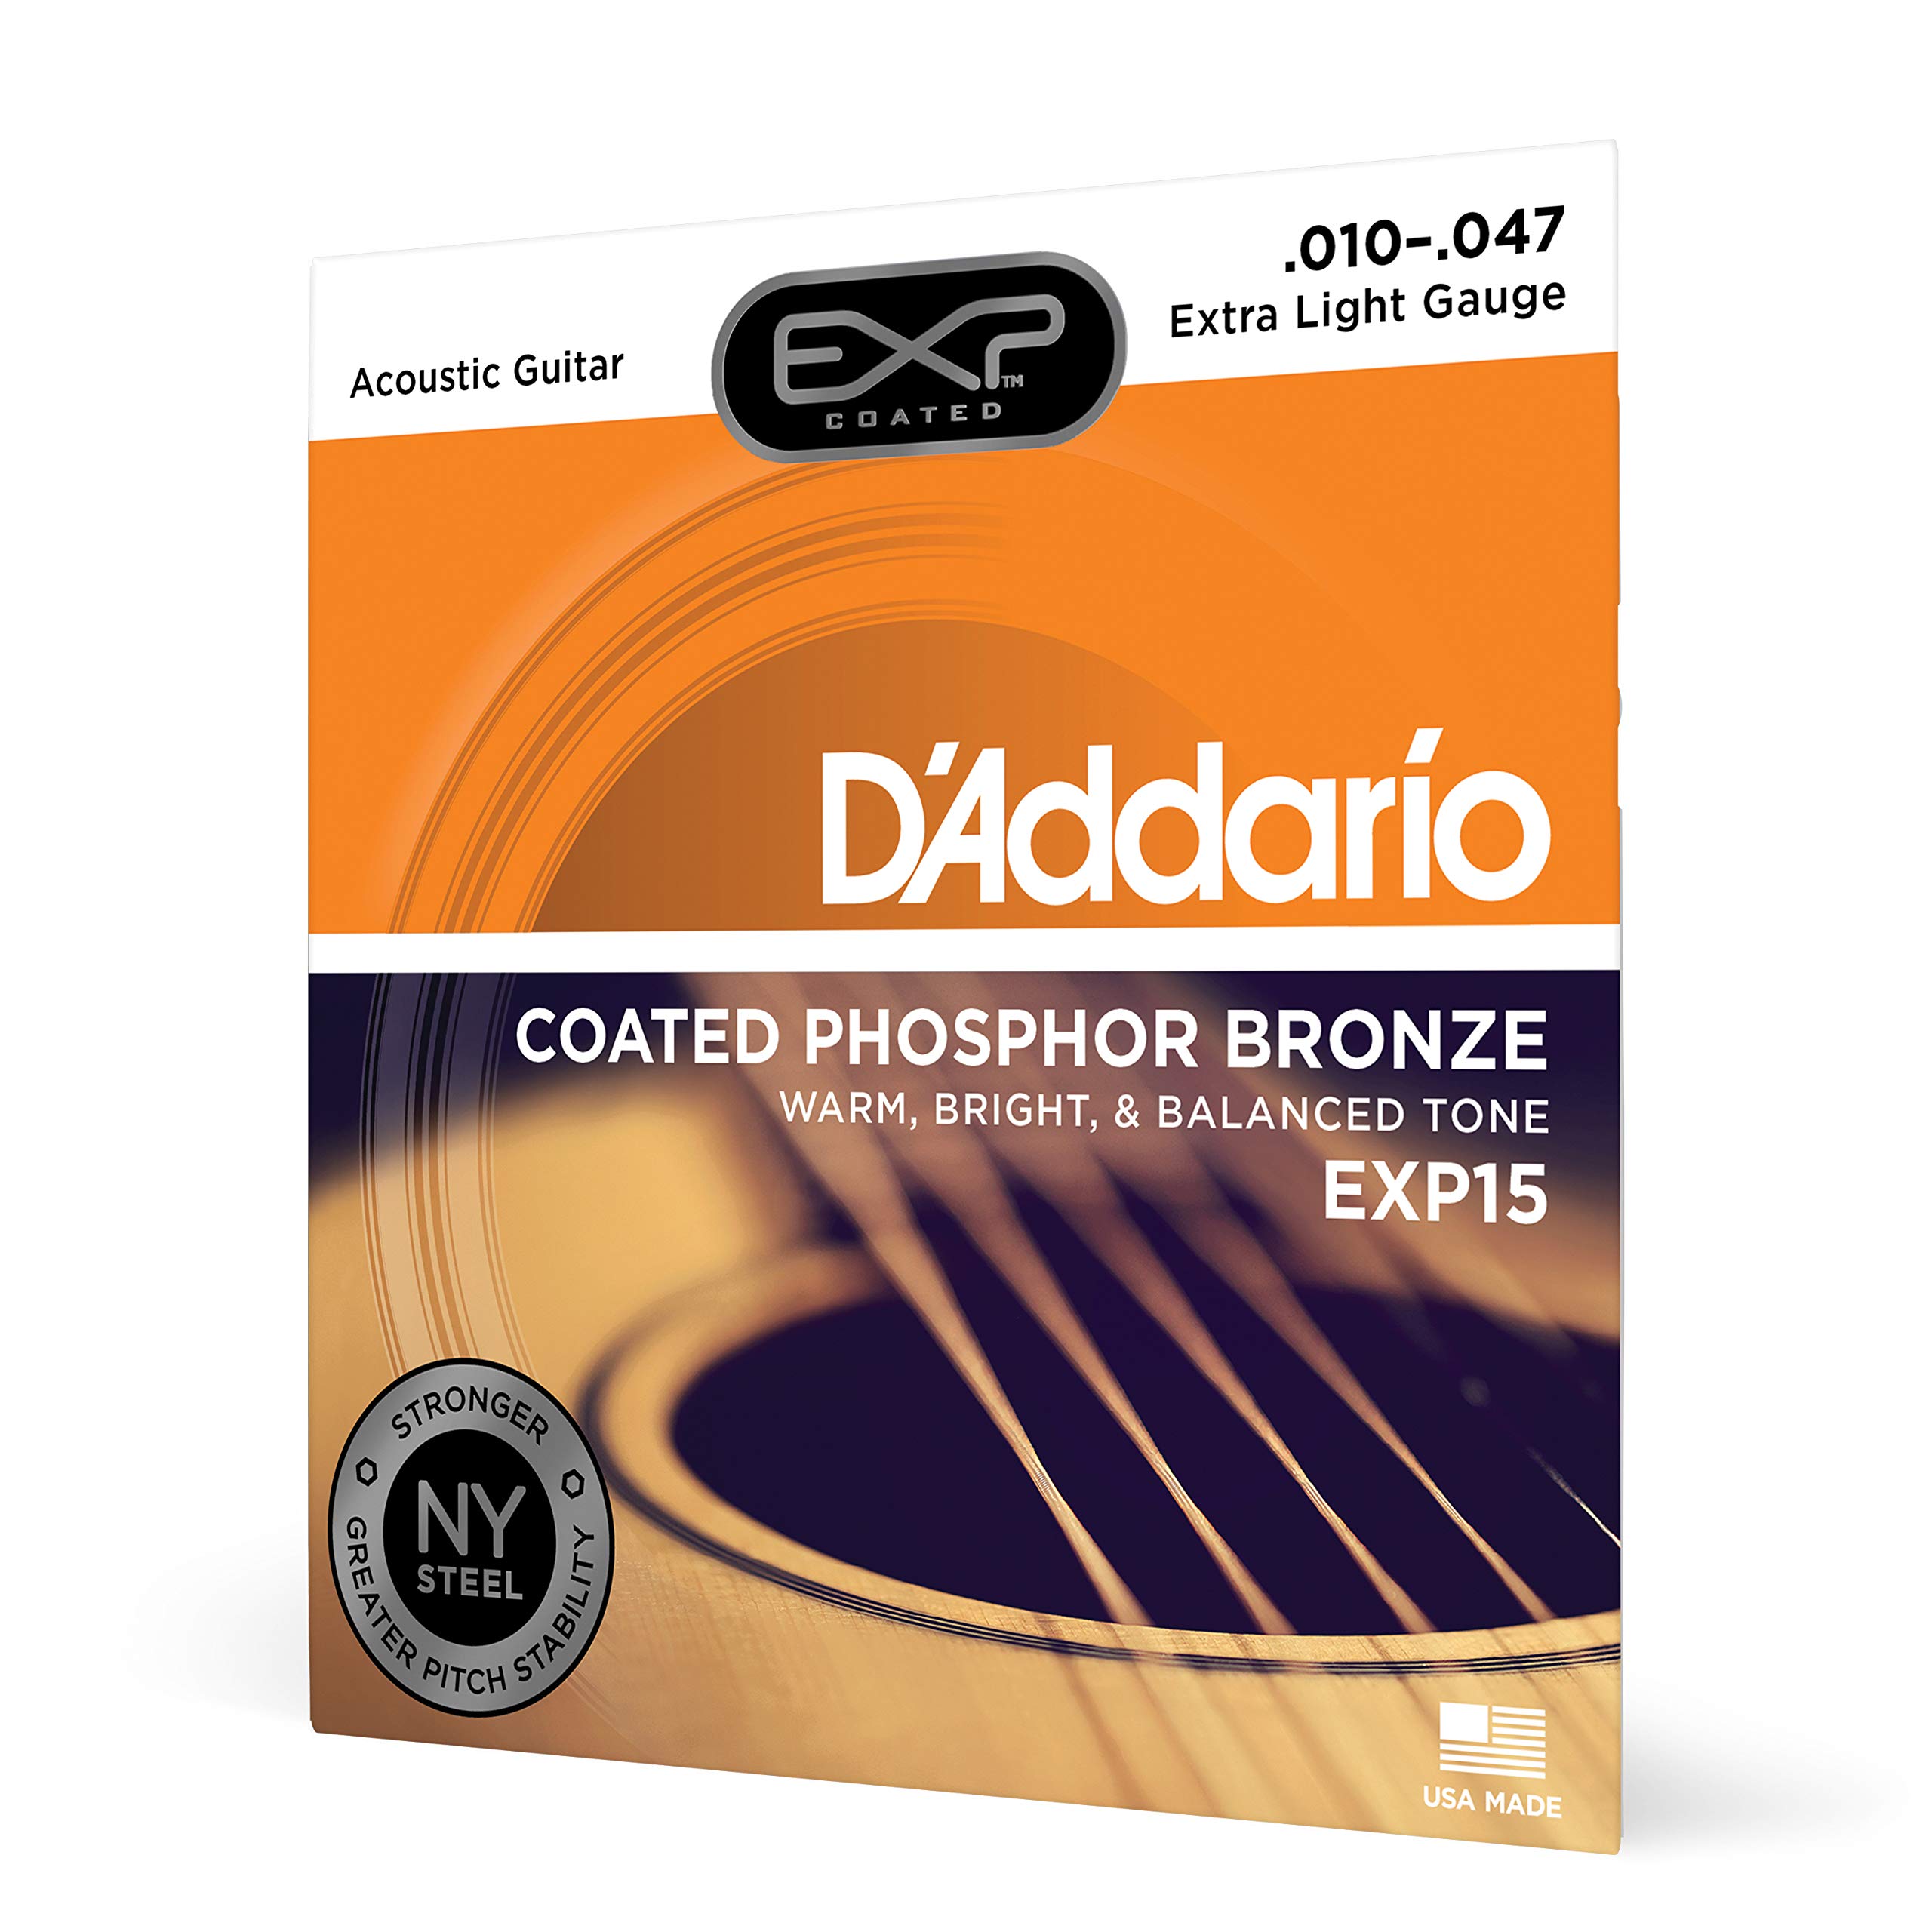 Book Cover D’Addario EXP15 Coated Phosphor Bronze Acoustic Guitar Strings, Light, 10-47 – Offers a Warm, Bright and Well-Balanced Acoustic Tone and 4x Longer Life - With NY Steel for Strength and Pitch Stability Extra Light, 10-47 1-Pack